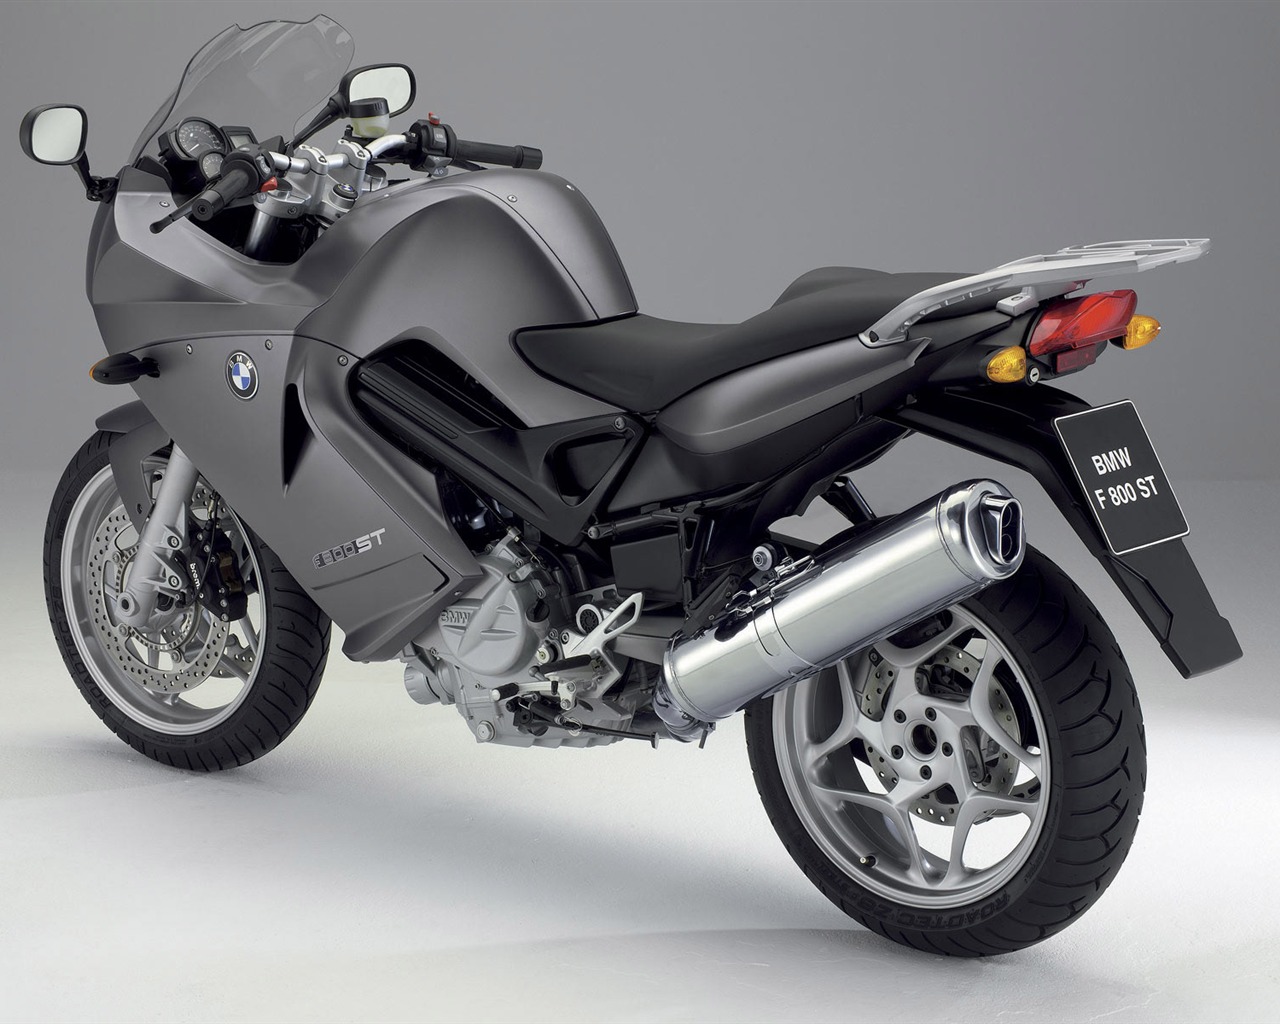 BMW motorcycle wallpapers (3) #2 - 1280x1024